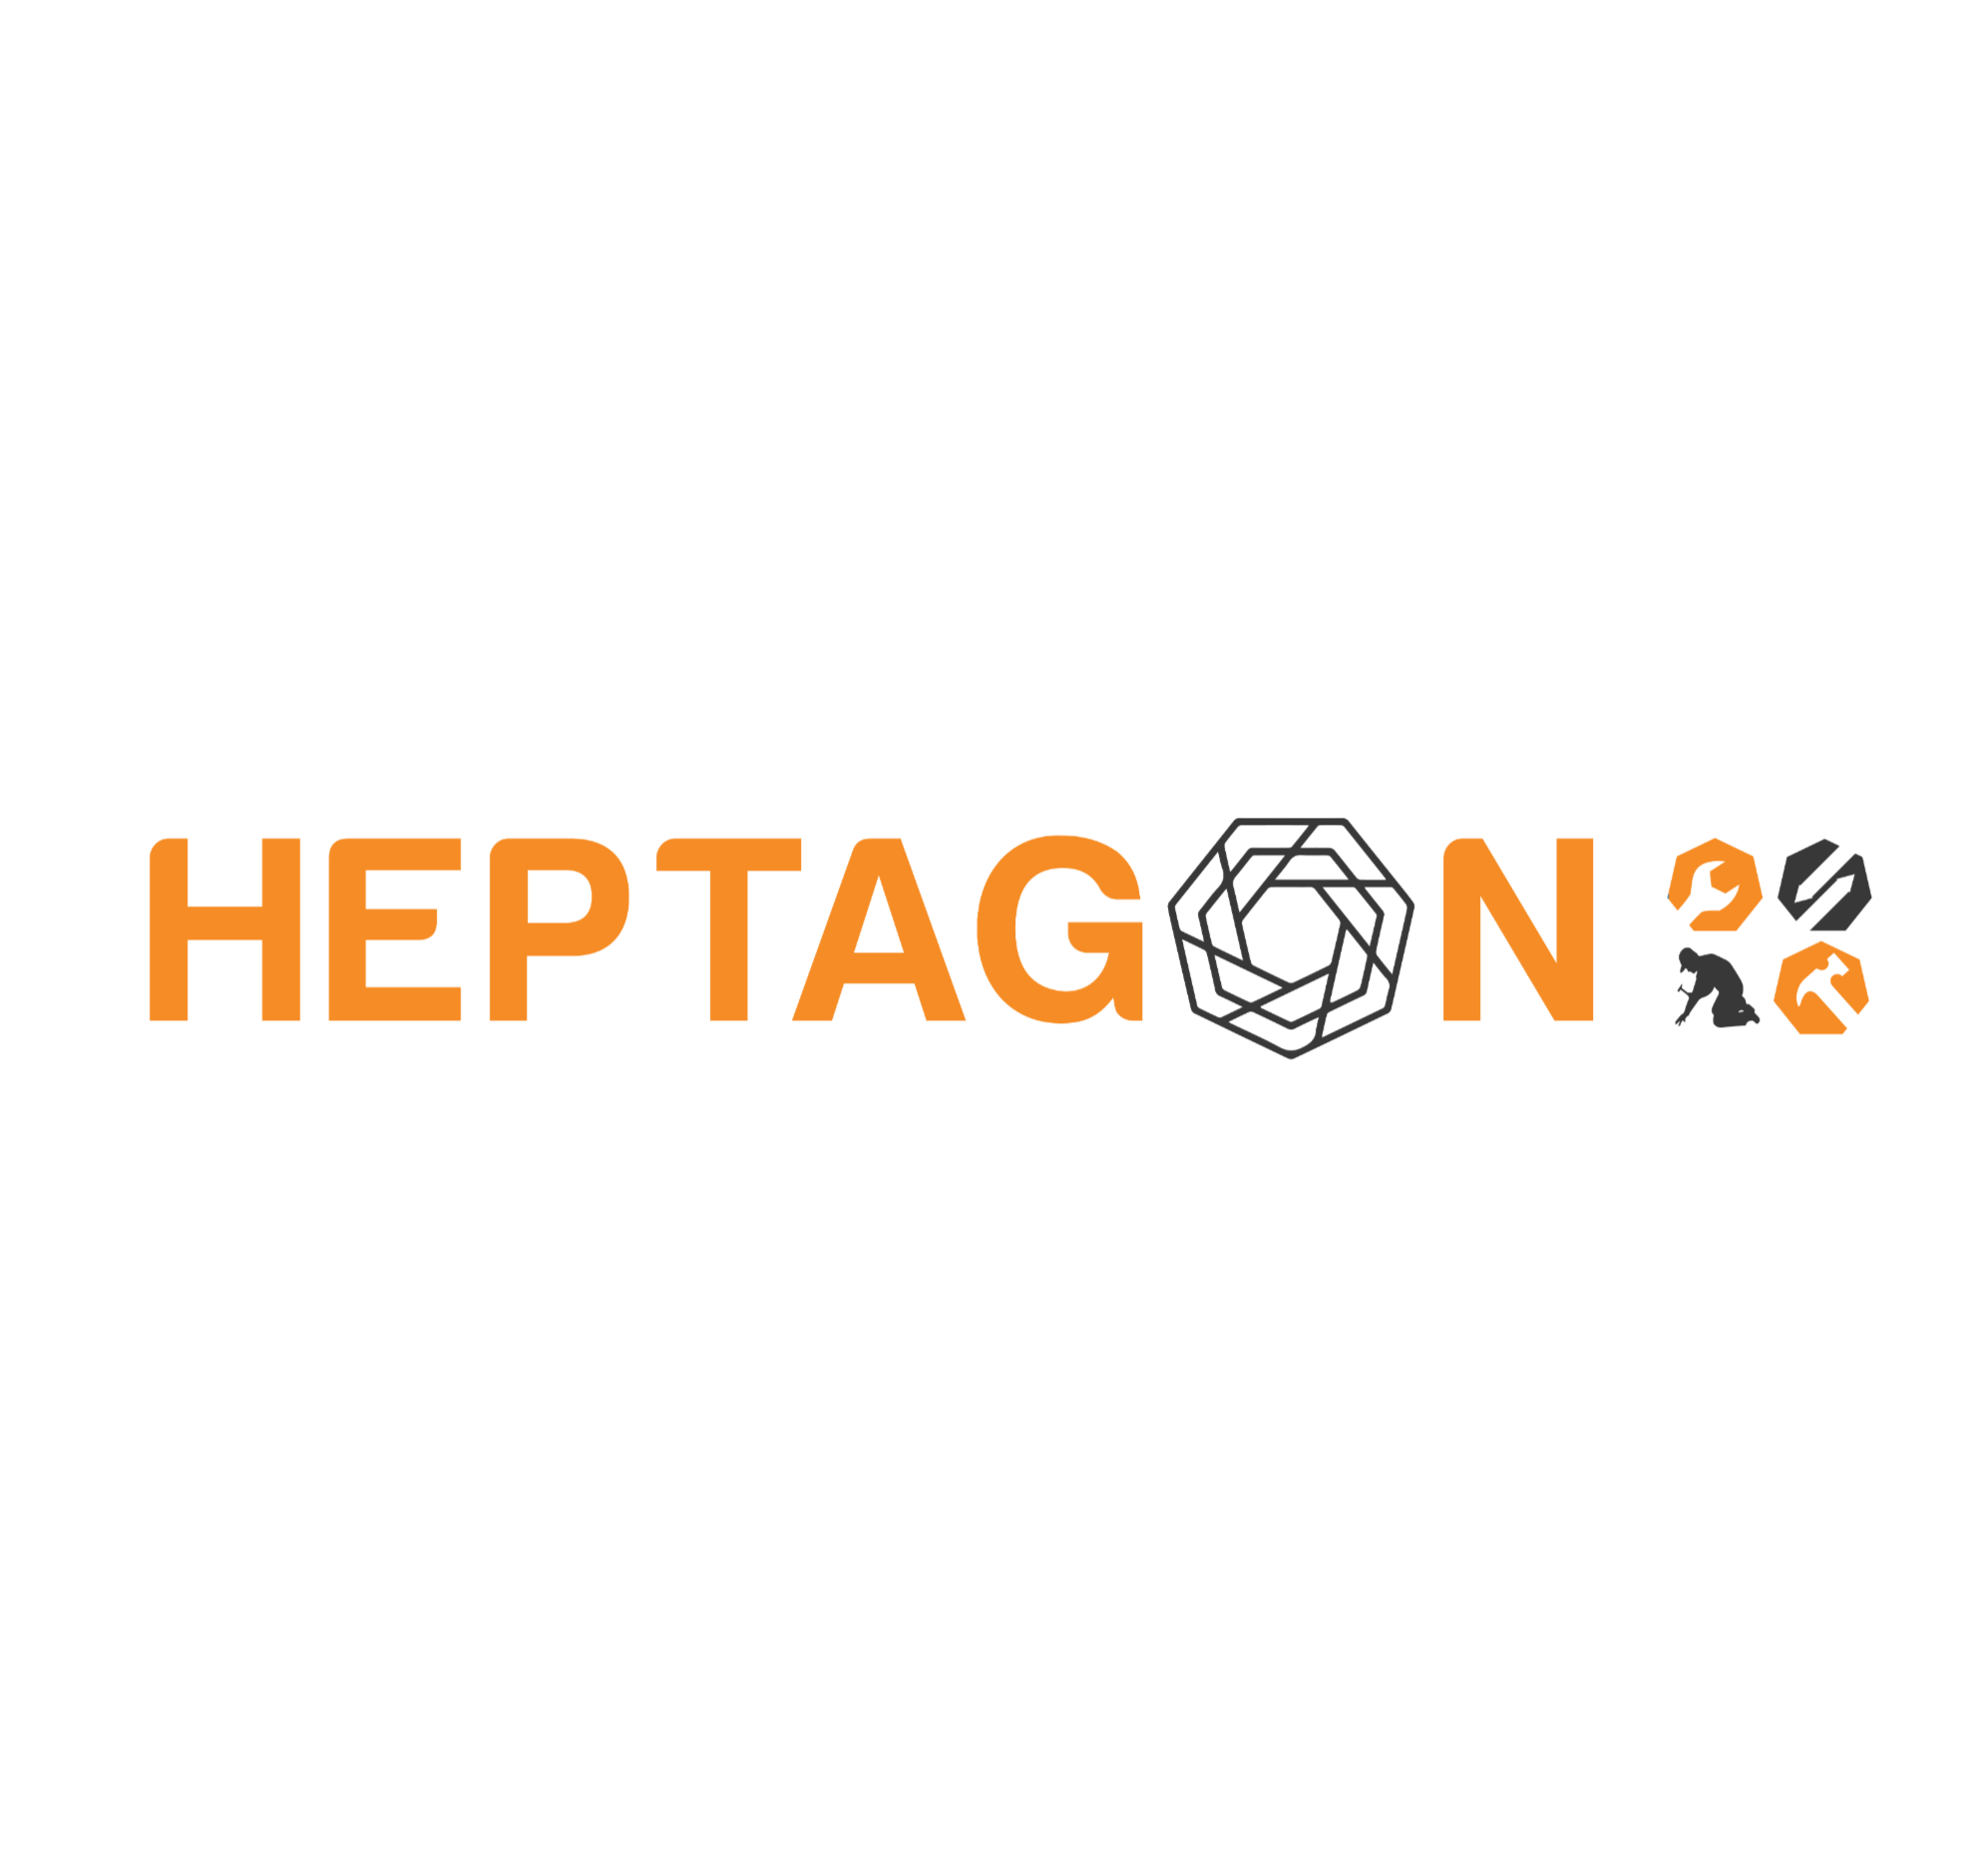 Heptagon for General Contracting's logo